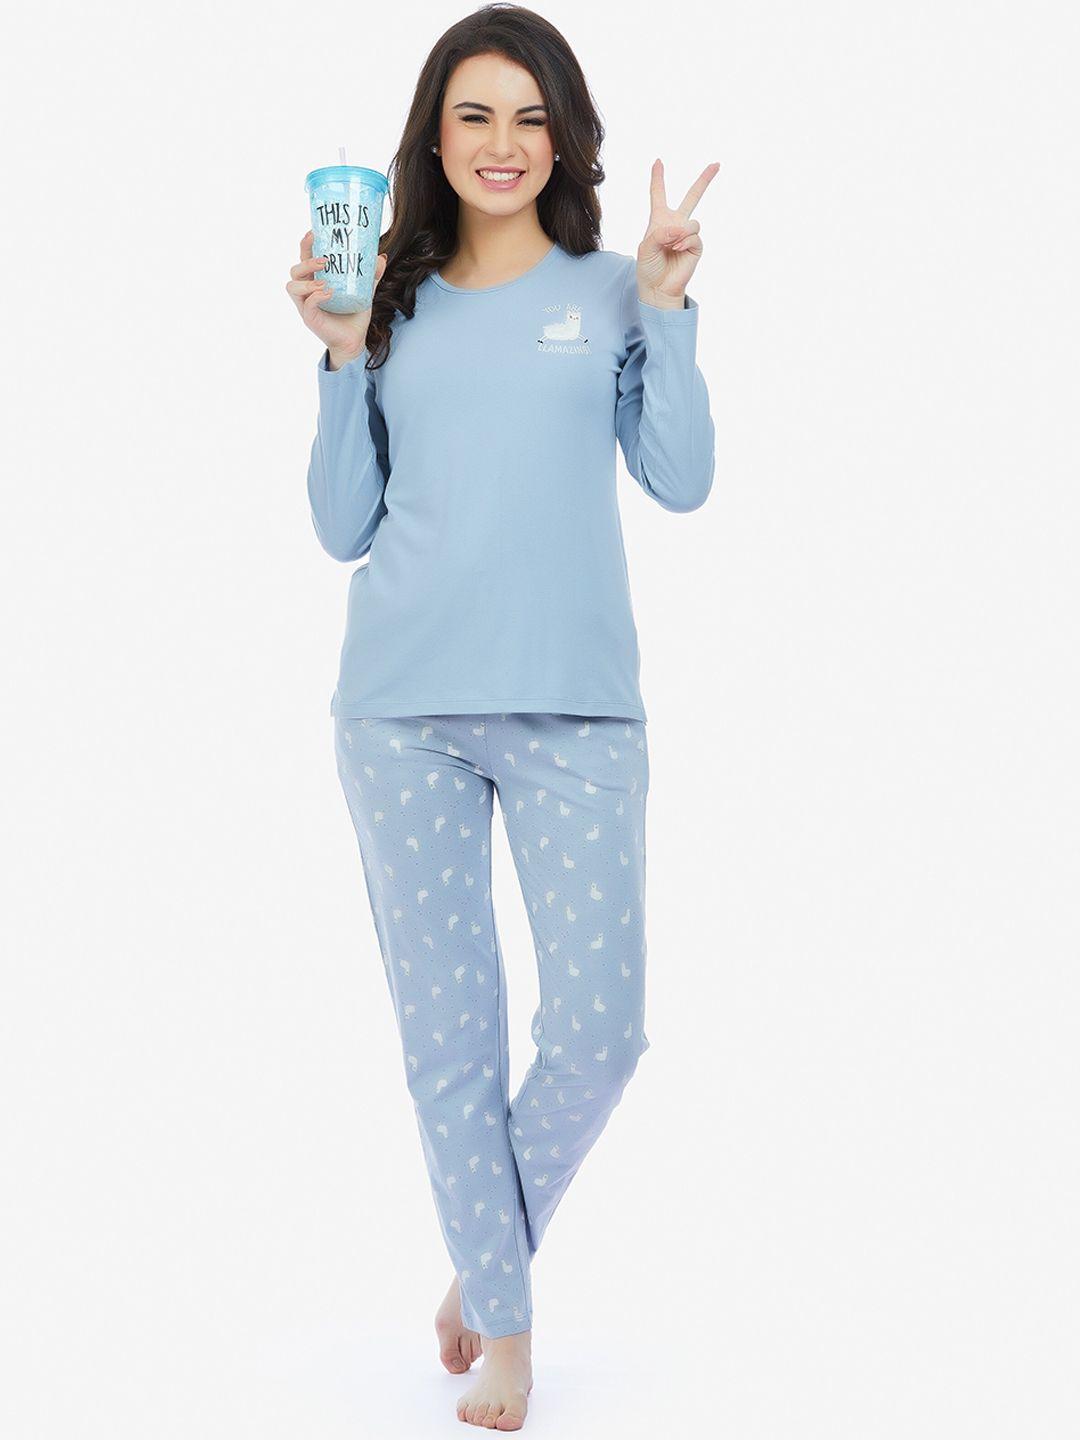 maysixty women graphic printed pure cotton night suit